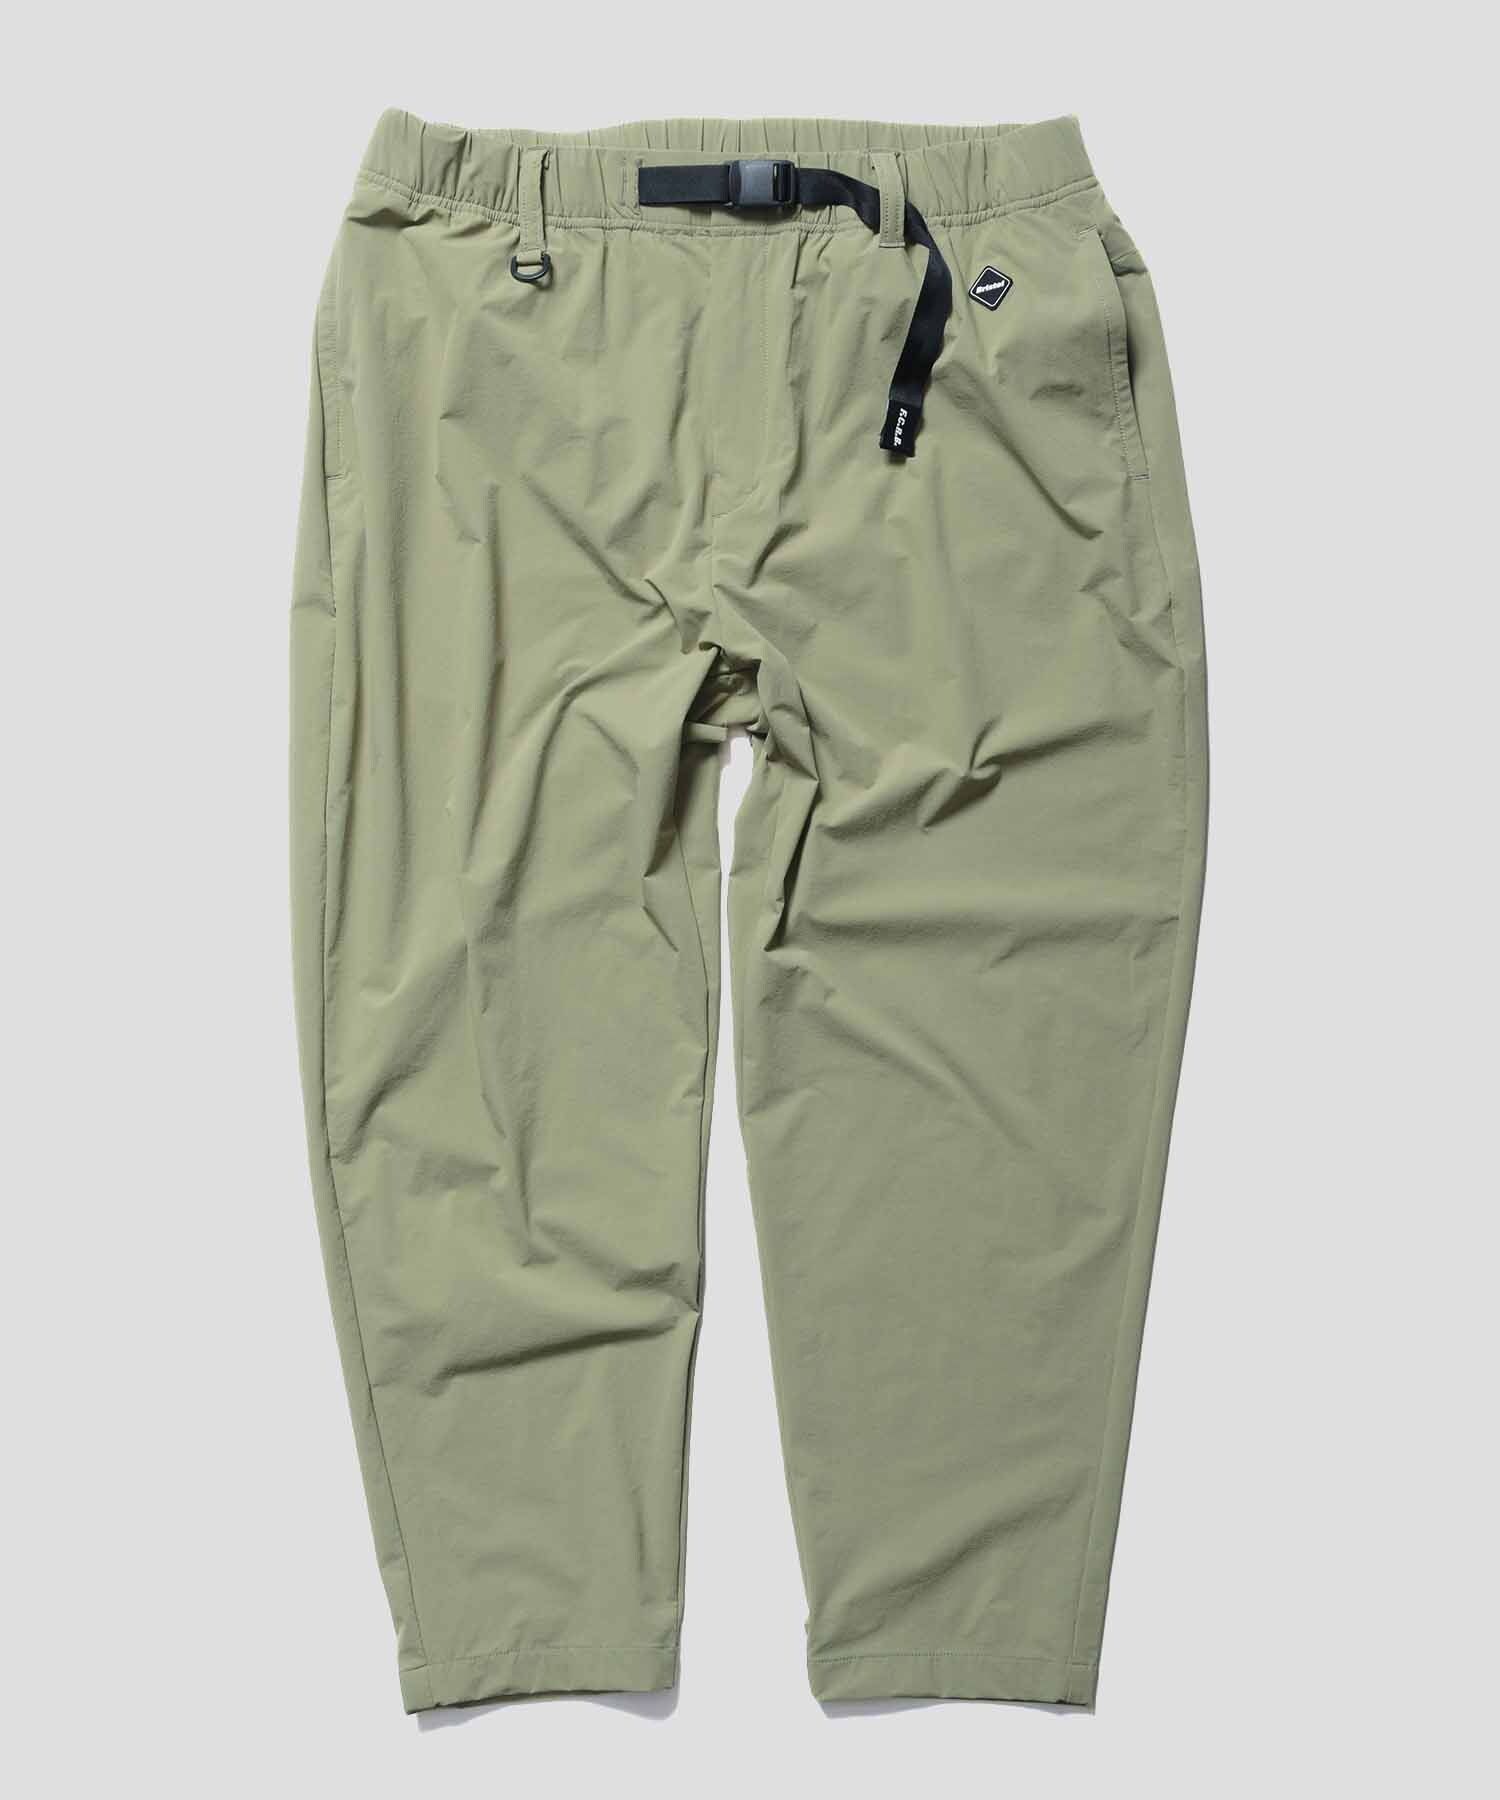 DRY ACTIVE STRETCH ADJUSTABLE UTILITY PANTS